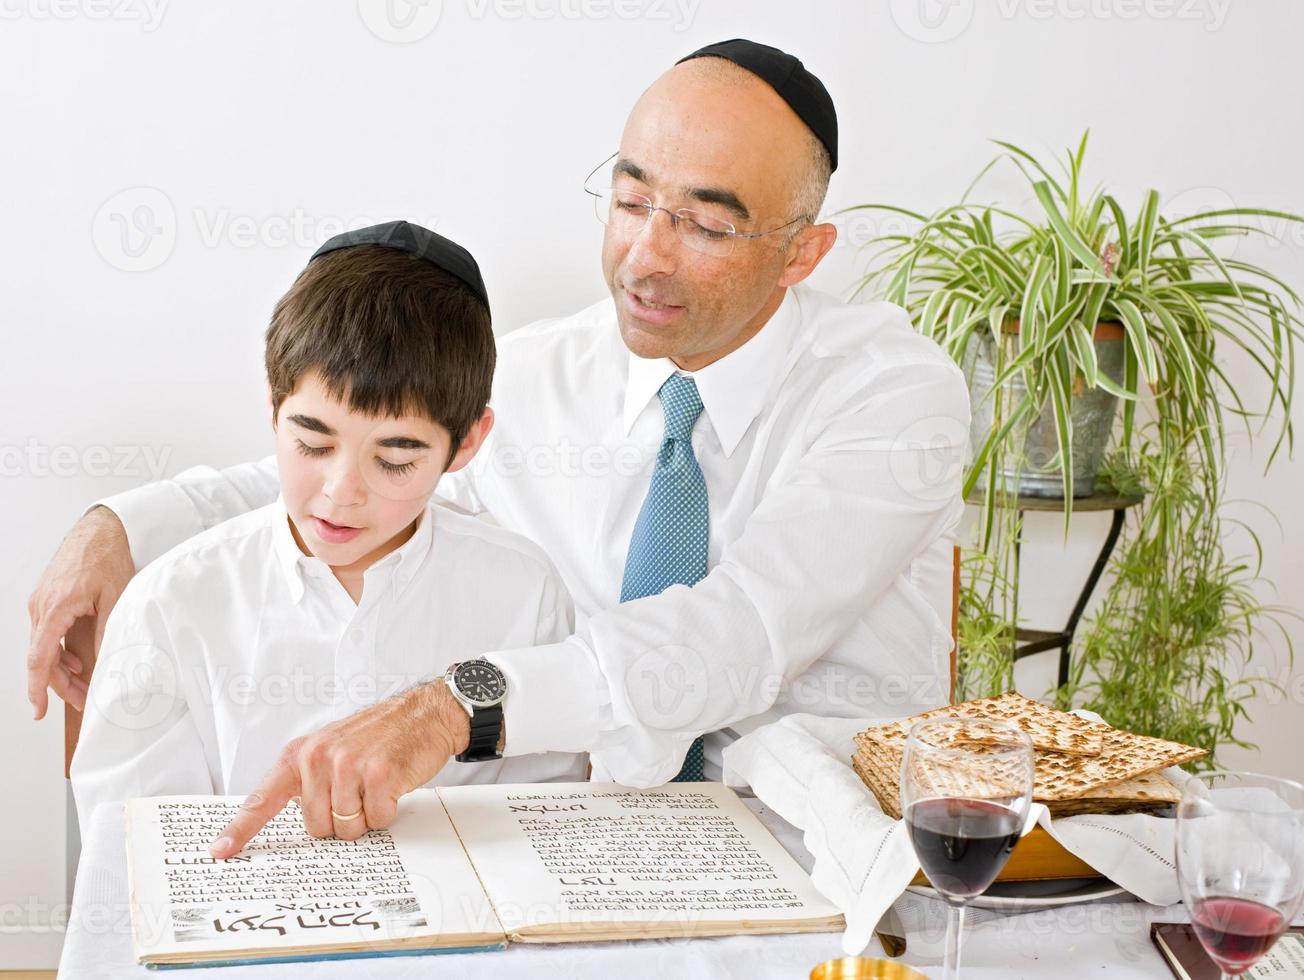 A father and son celebrating Passover and reading photo